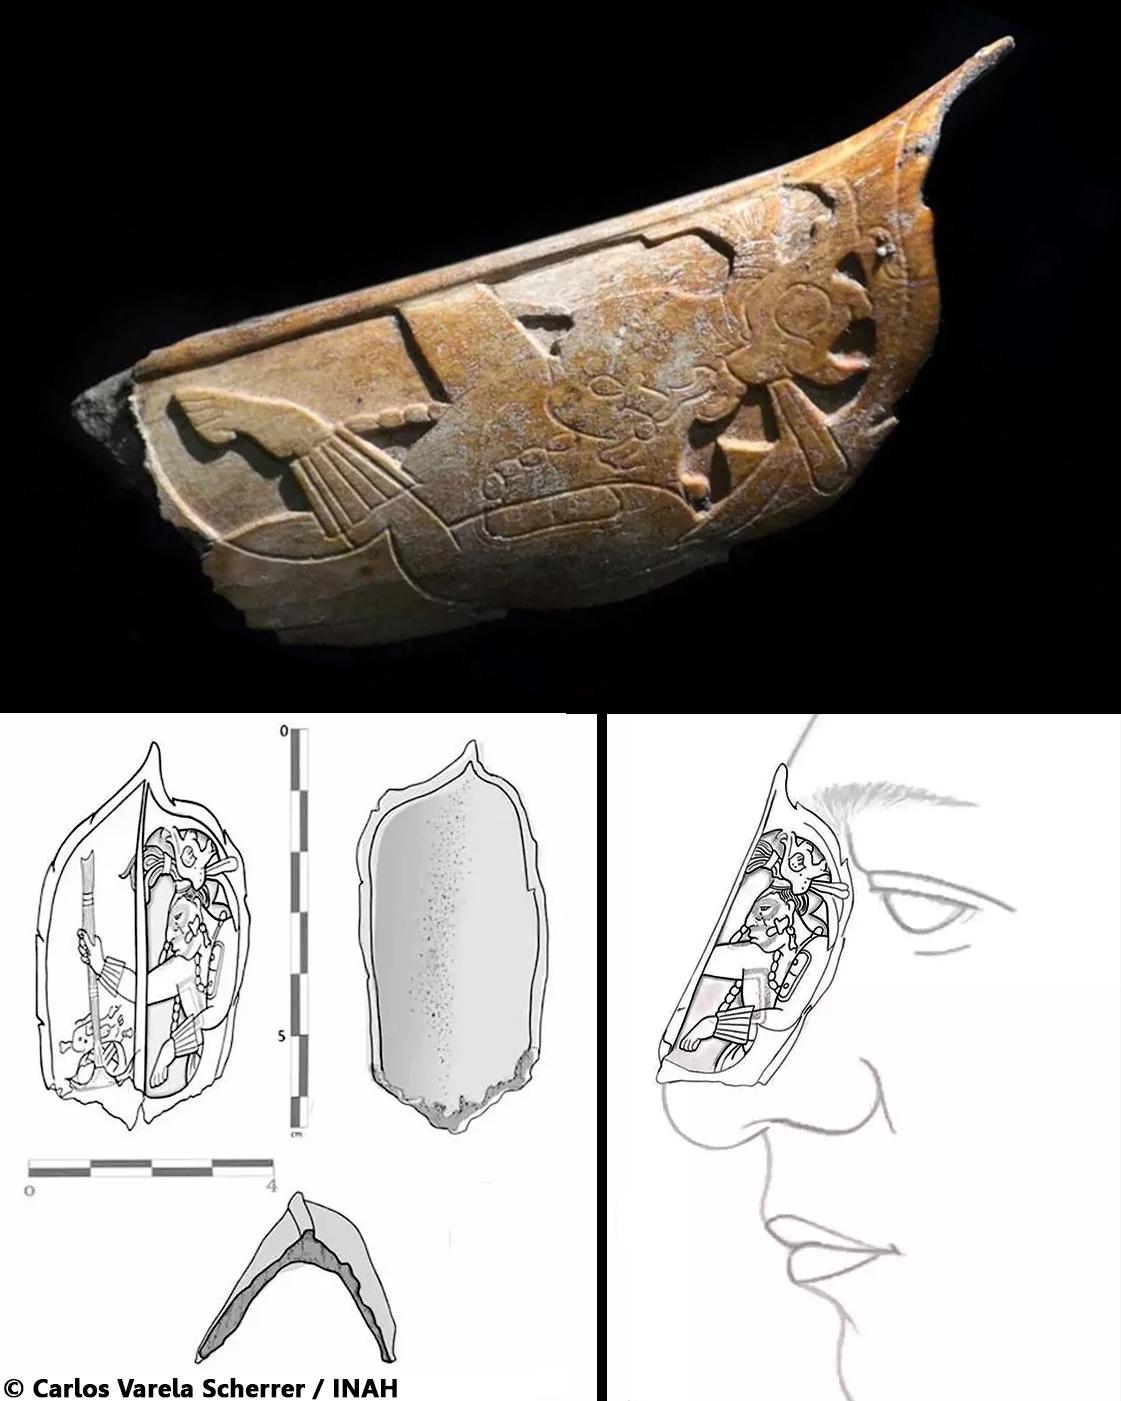 Maya nose ornament made of human bone unearthed at Palenque Ruins